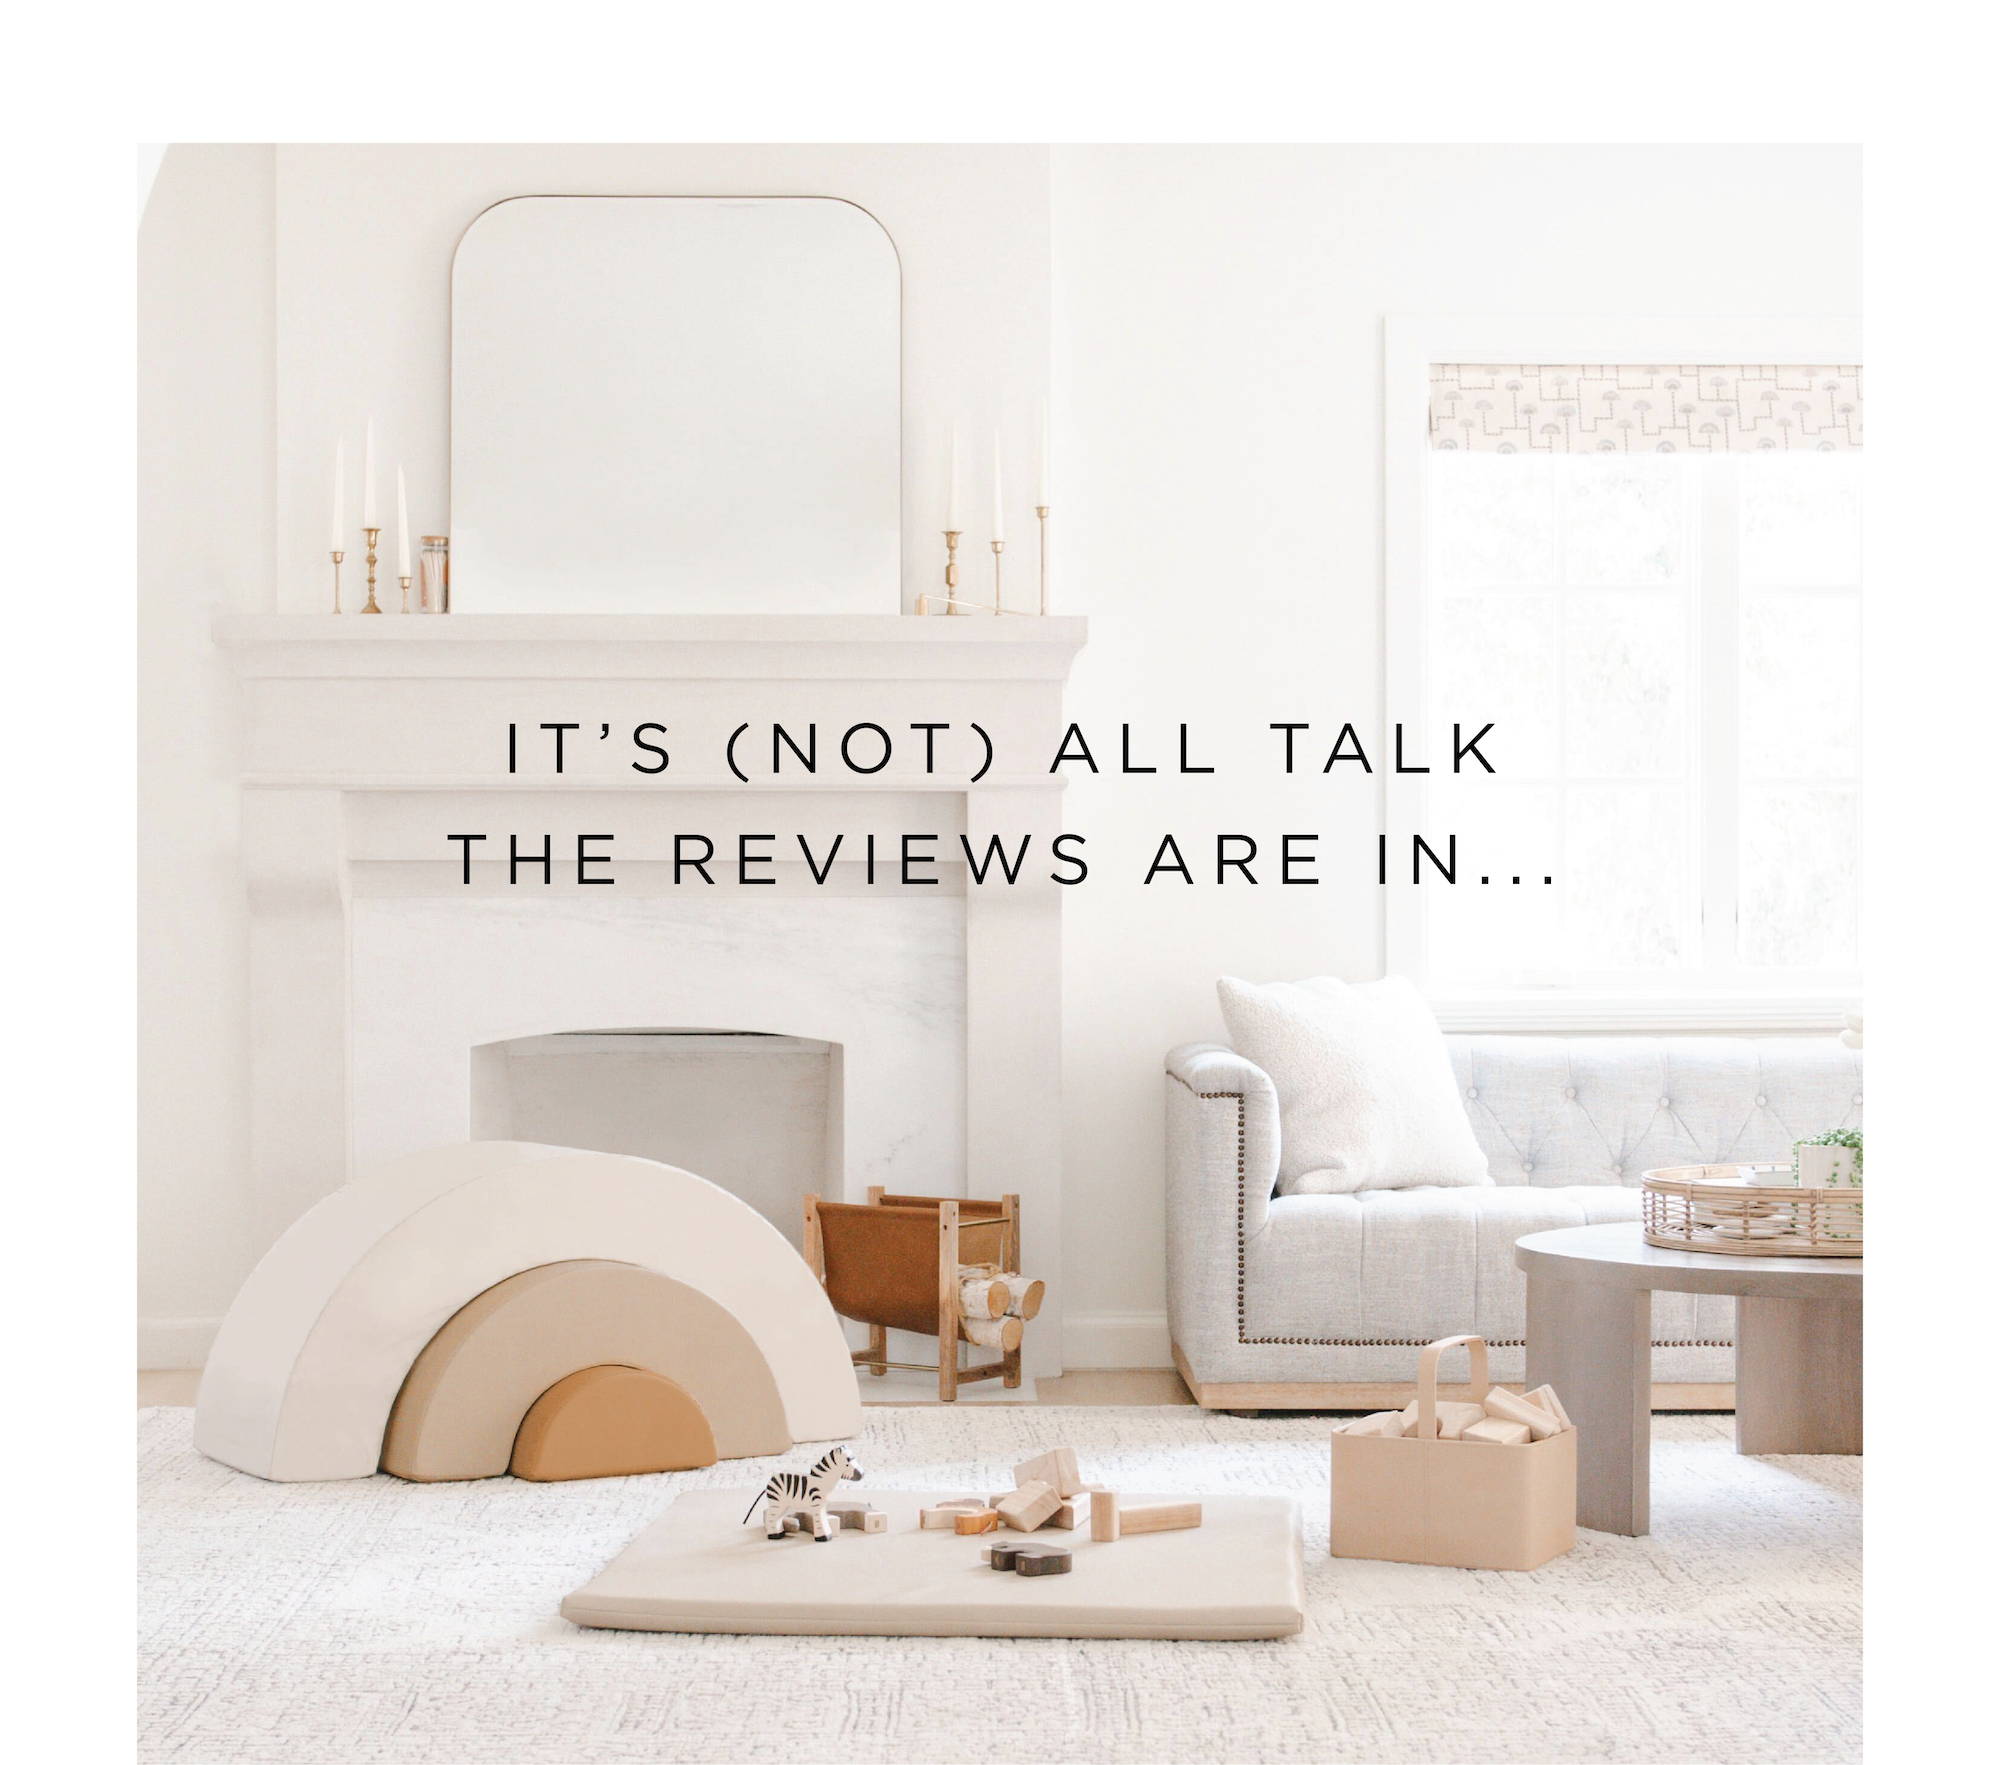 Its (not) all talk, the reviews are in... Featuring Gathre Play Products